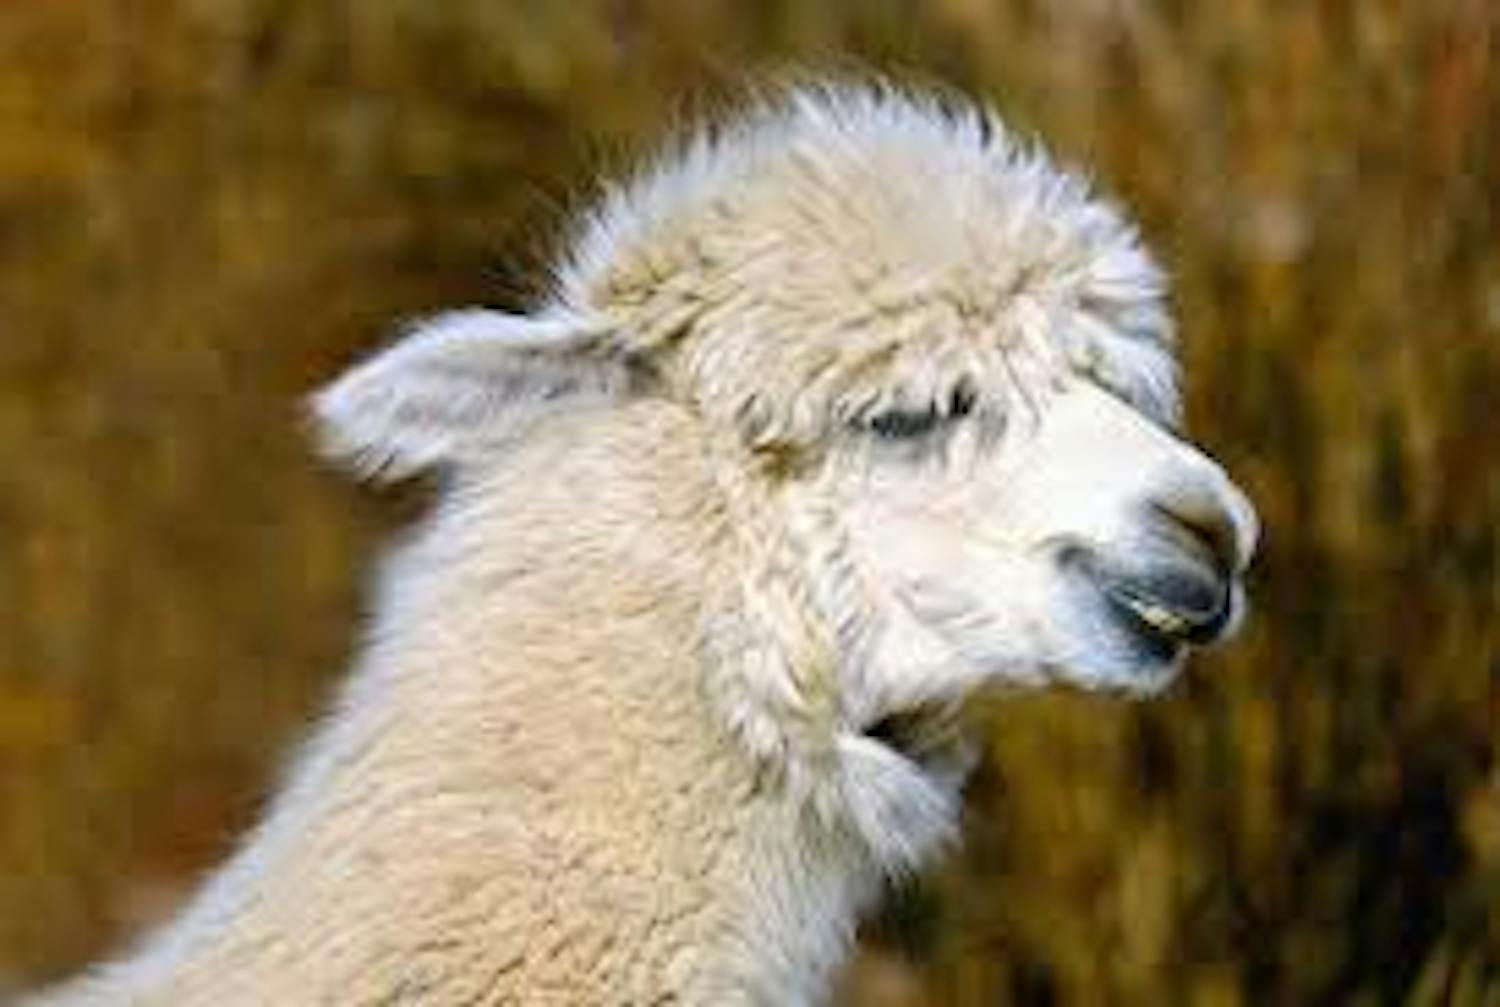 Pete The Vet: Using a llama to mind sheep